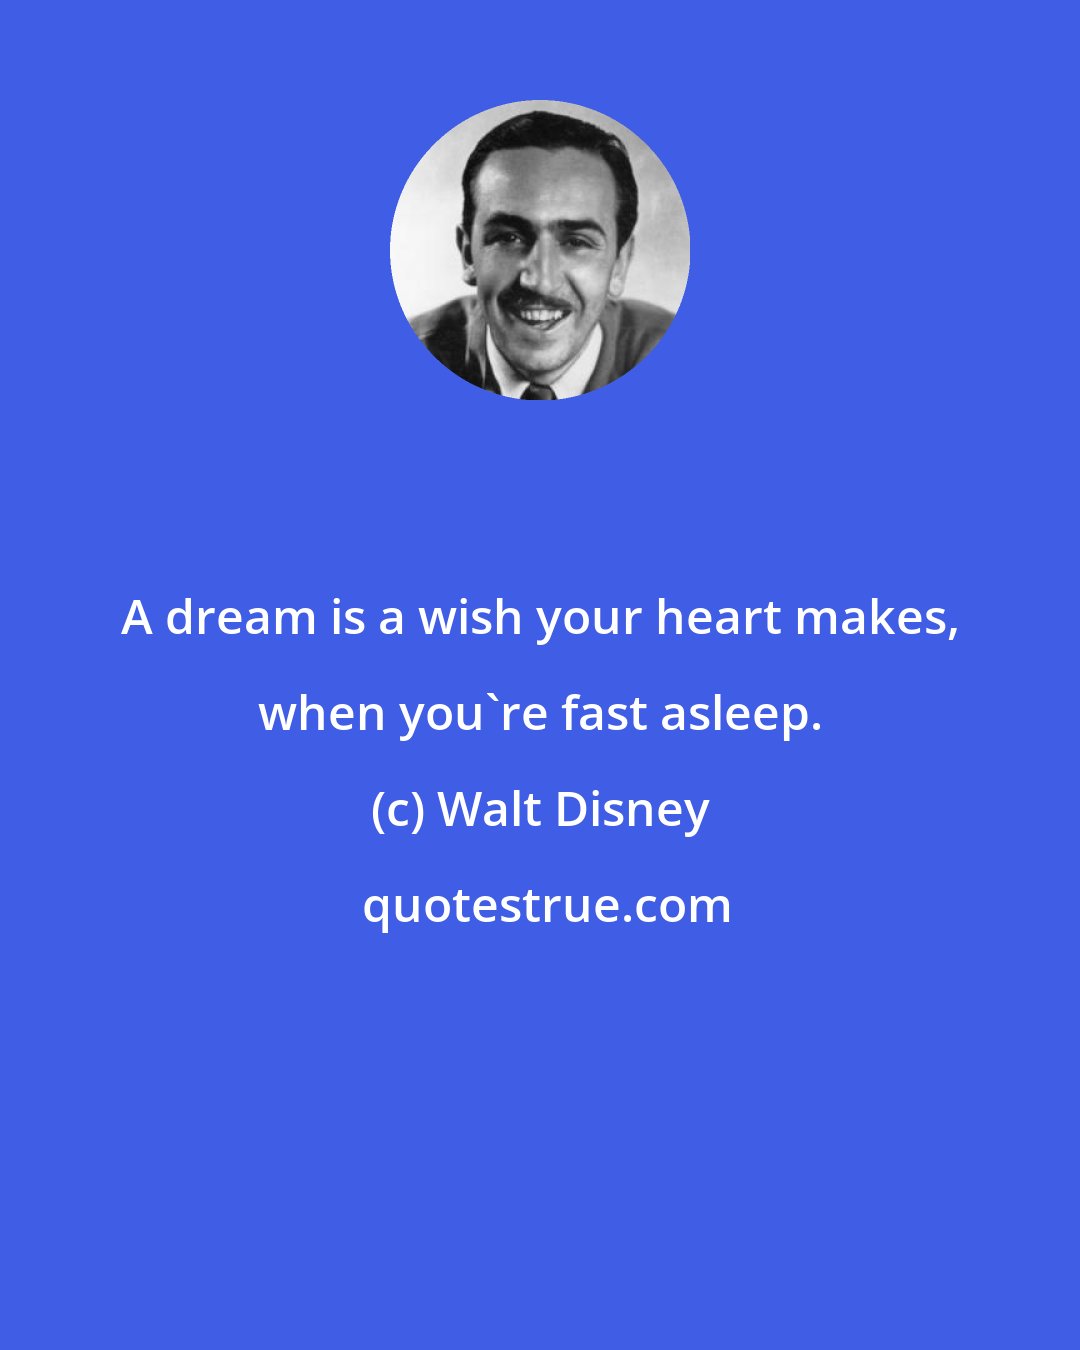 Walt Disney: A dream is a wish your heart makes, when you're fast asleep.